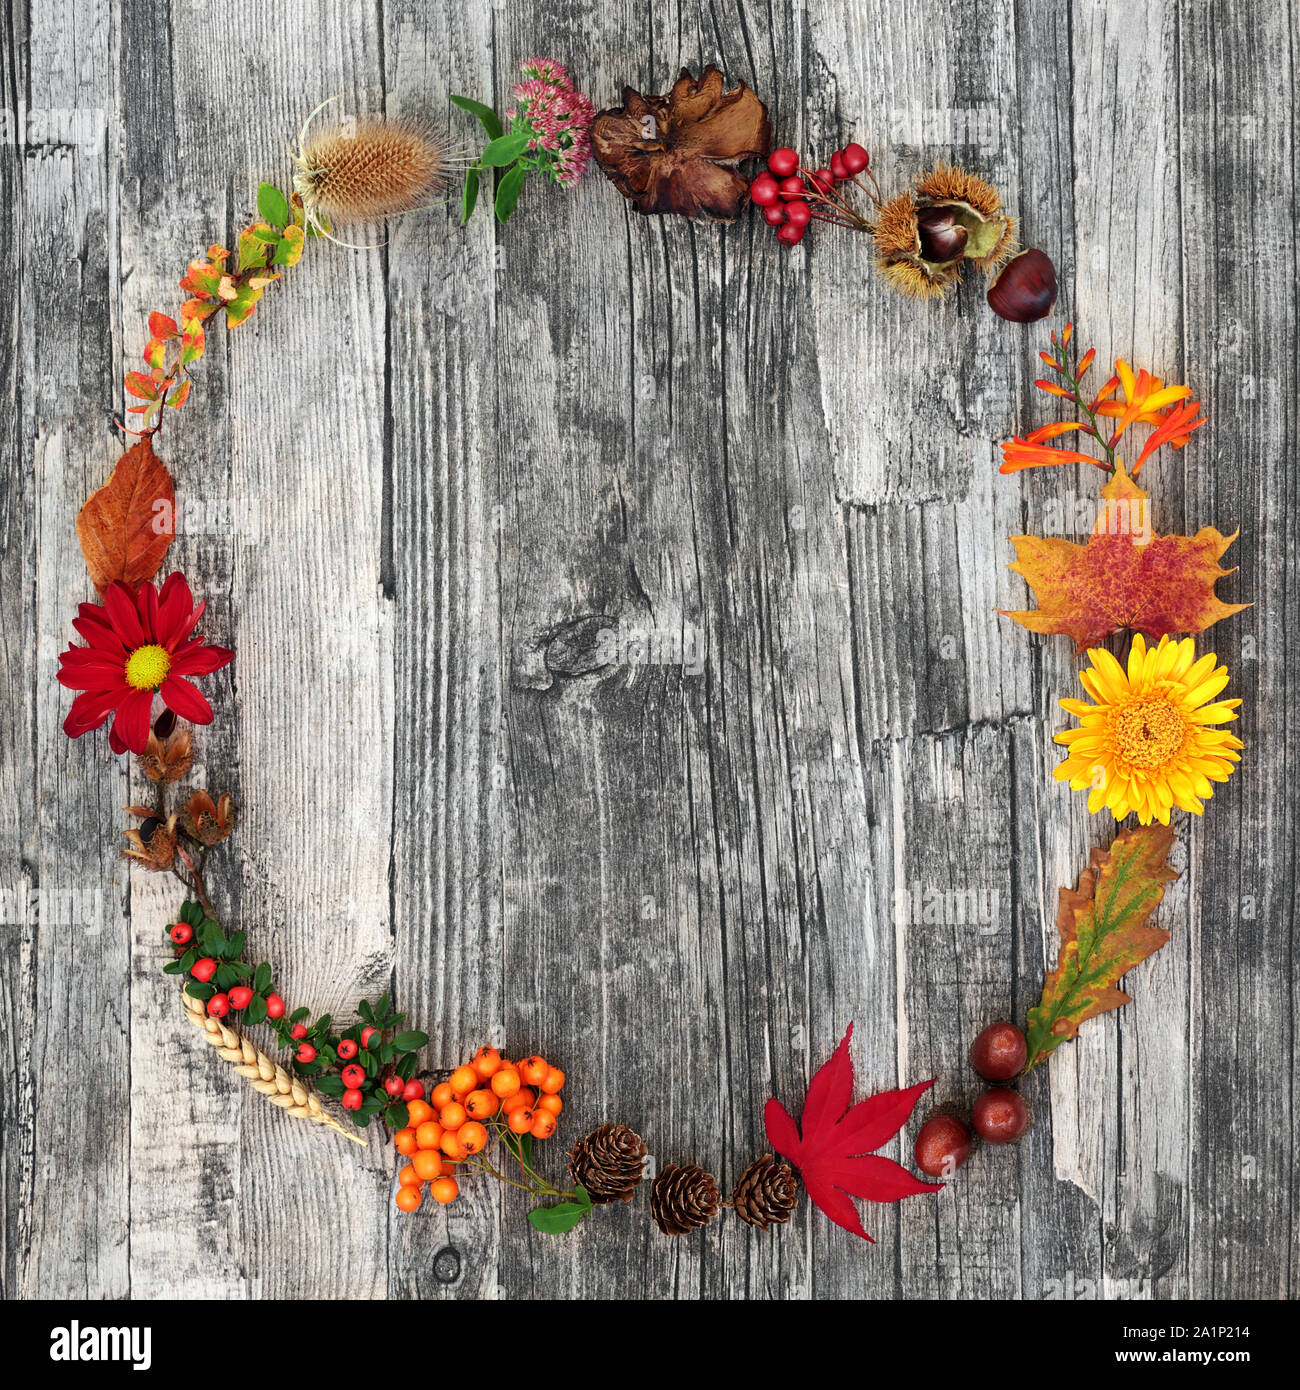 Autumn harvest wreath abstract composition with a variety of natural flora and food on rustic wood background. Harvest festival theme. Stock Photo